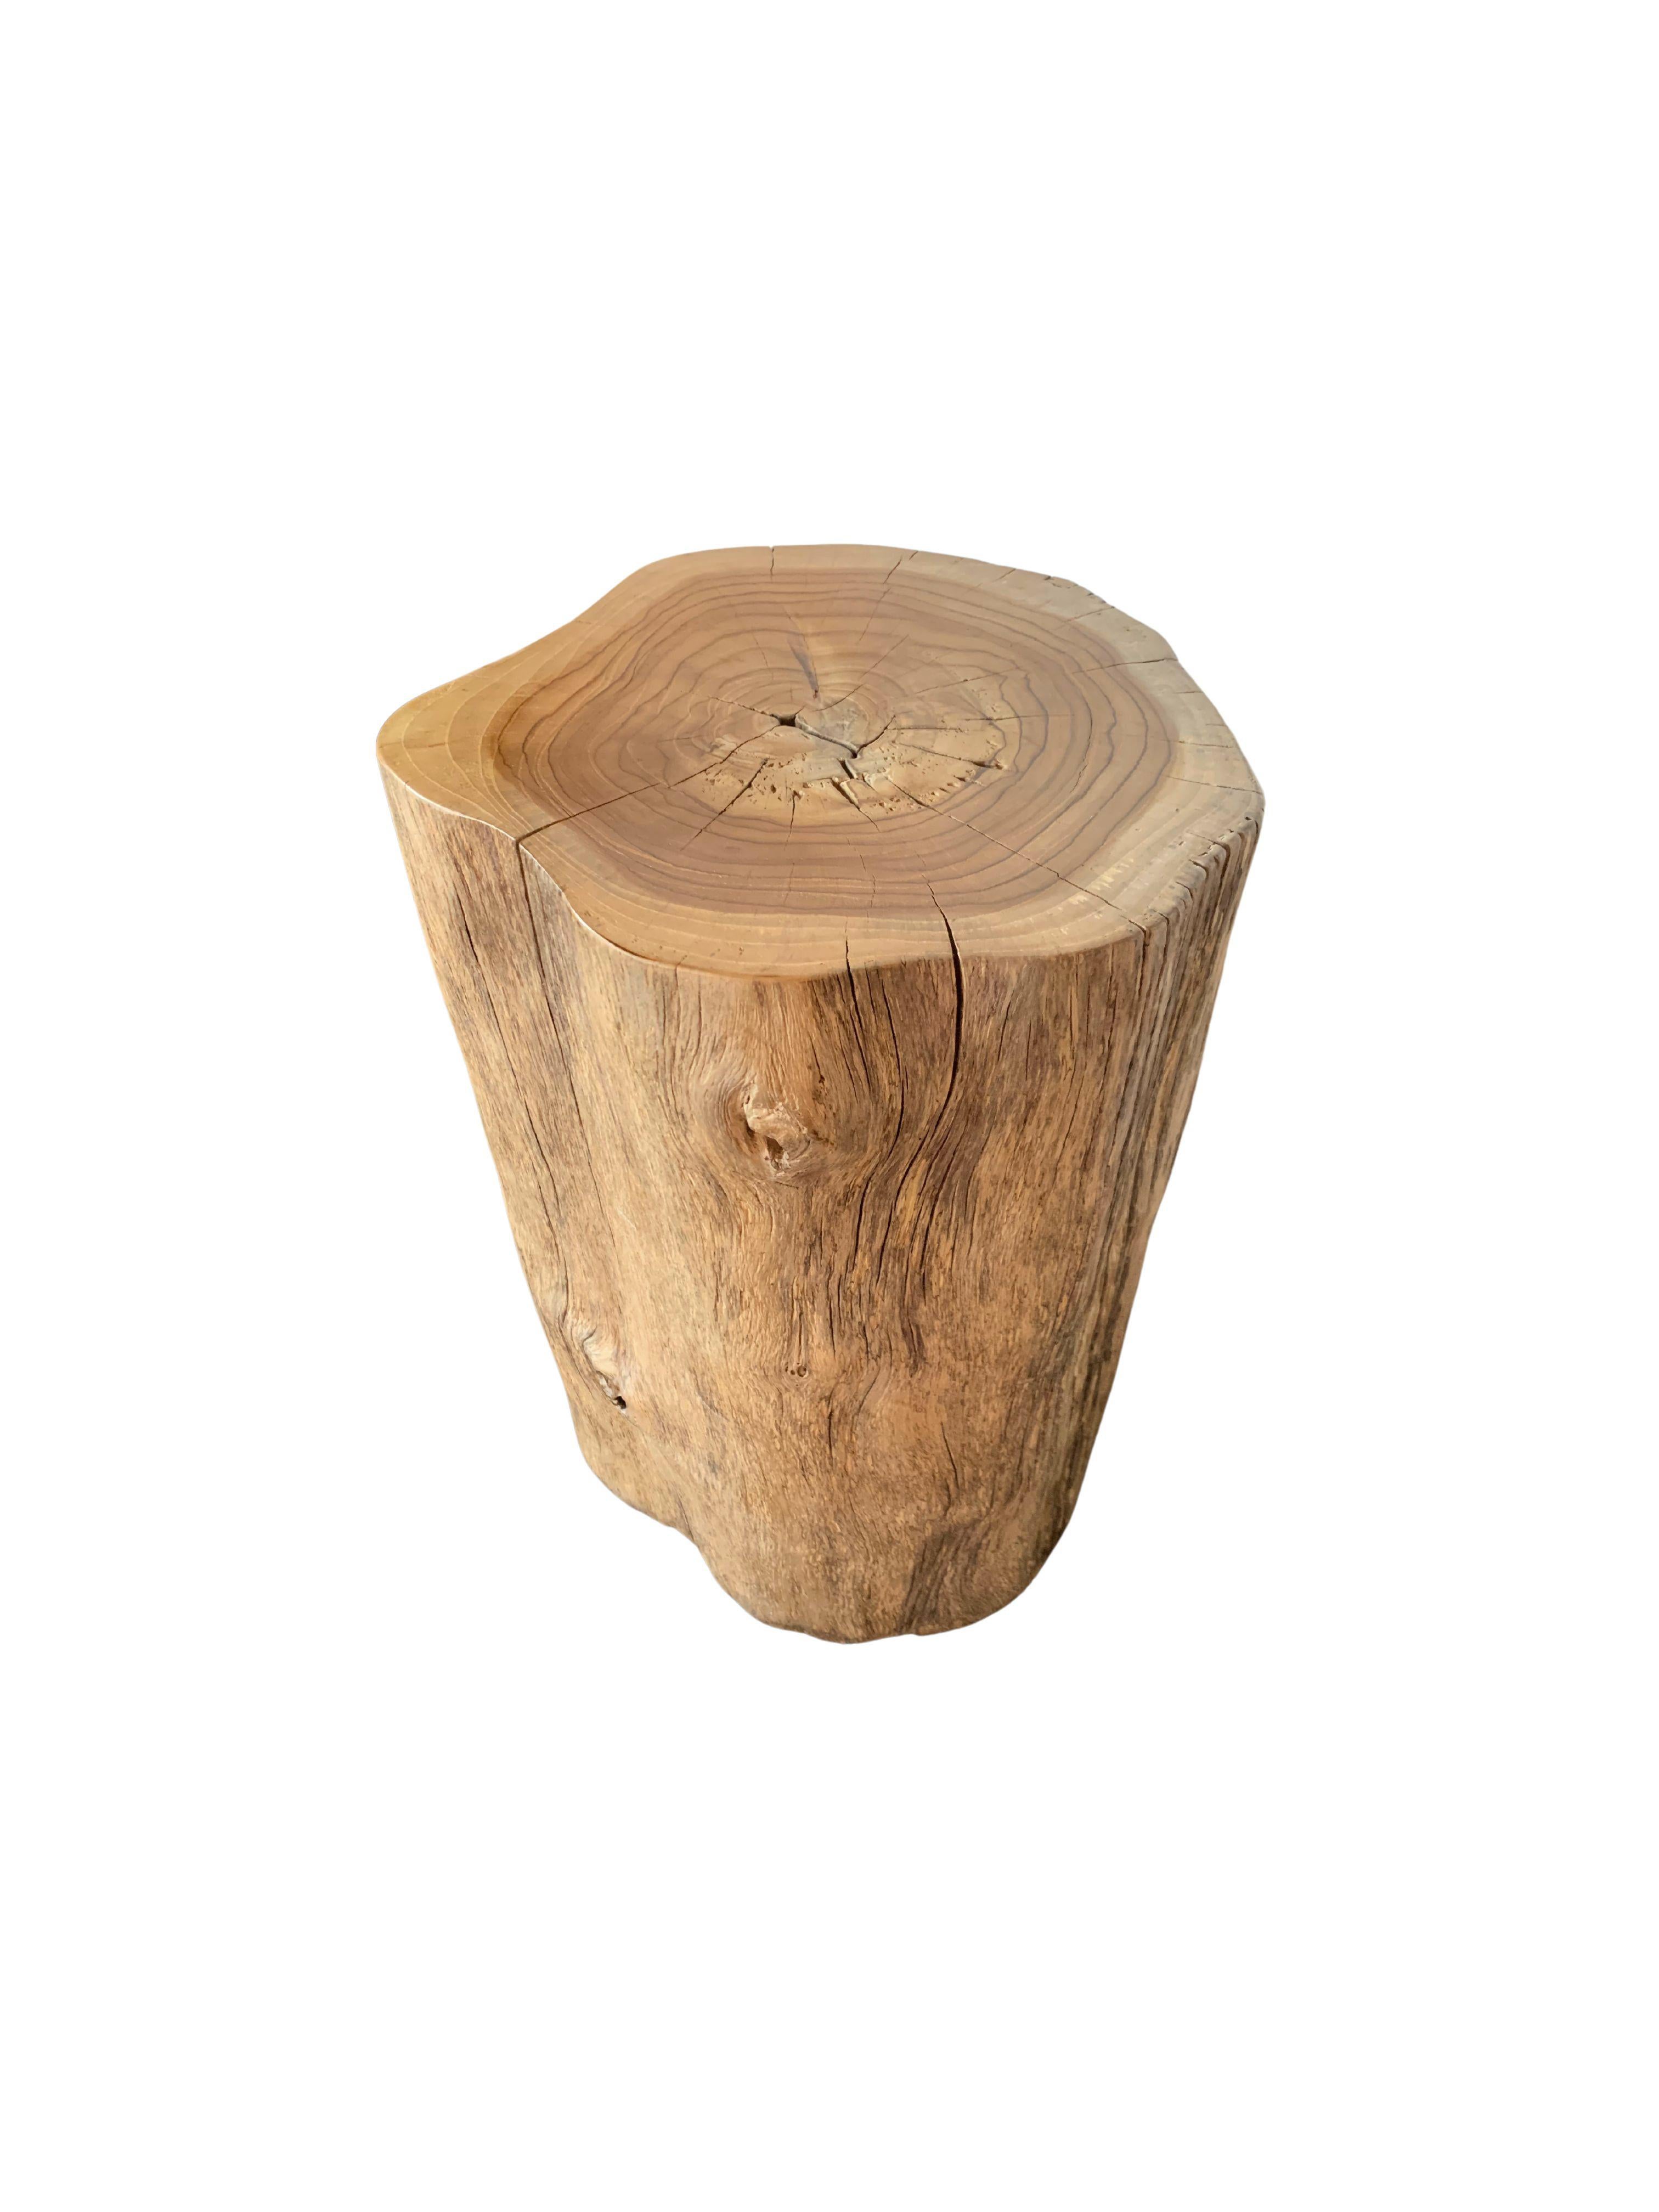 Indonesian Tree Trunk Side Table Solid Teak Wood Natural Finish Modern Organic For Sale